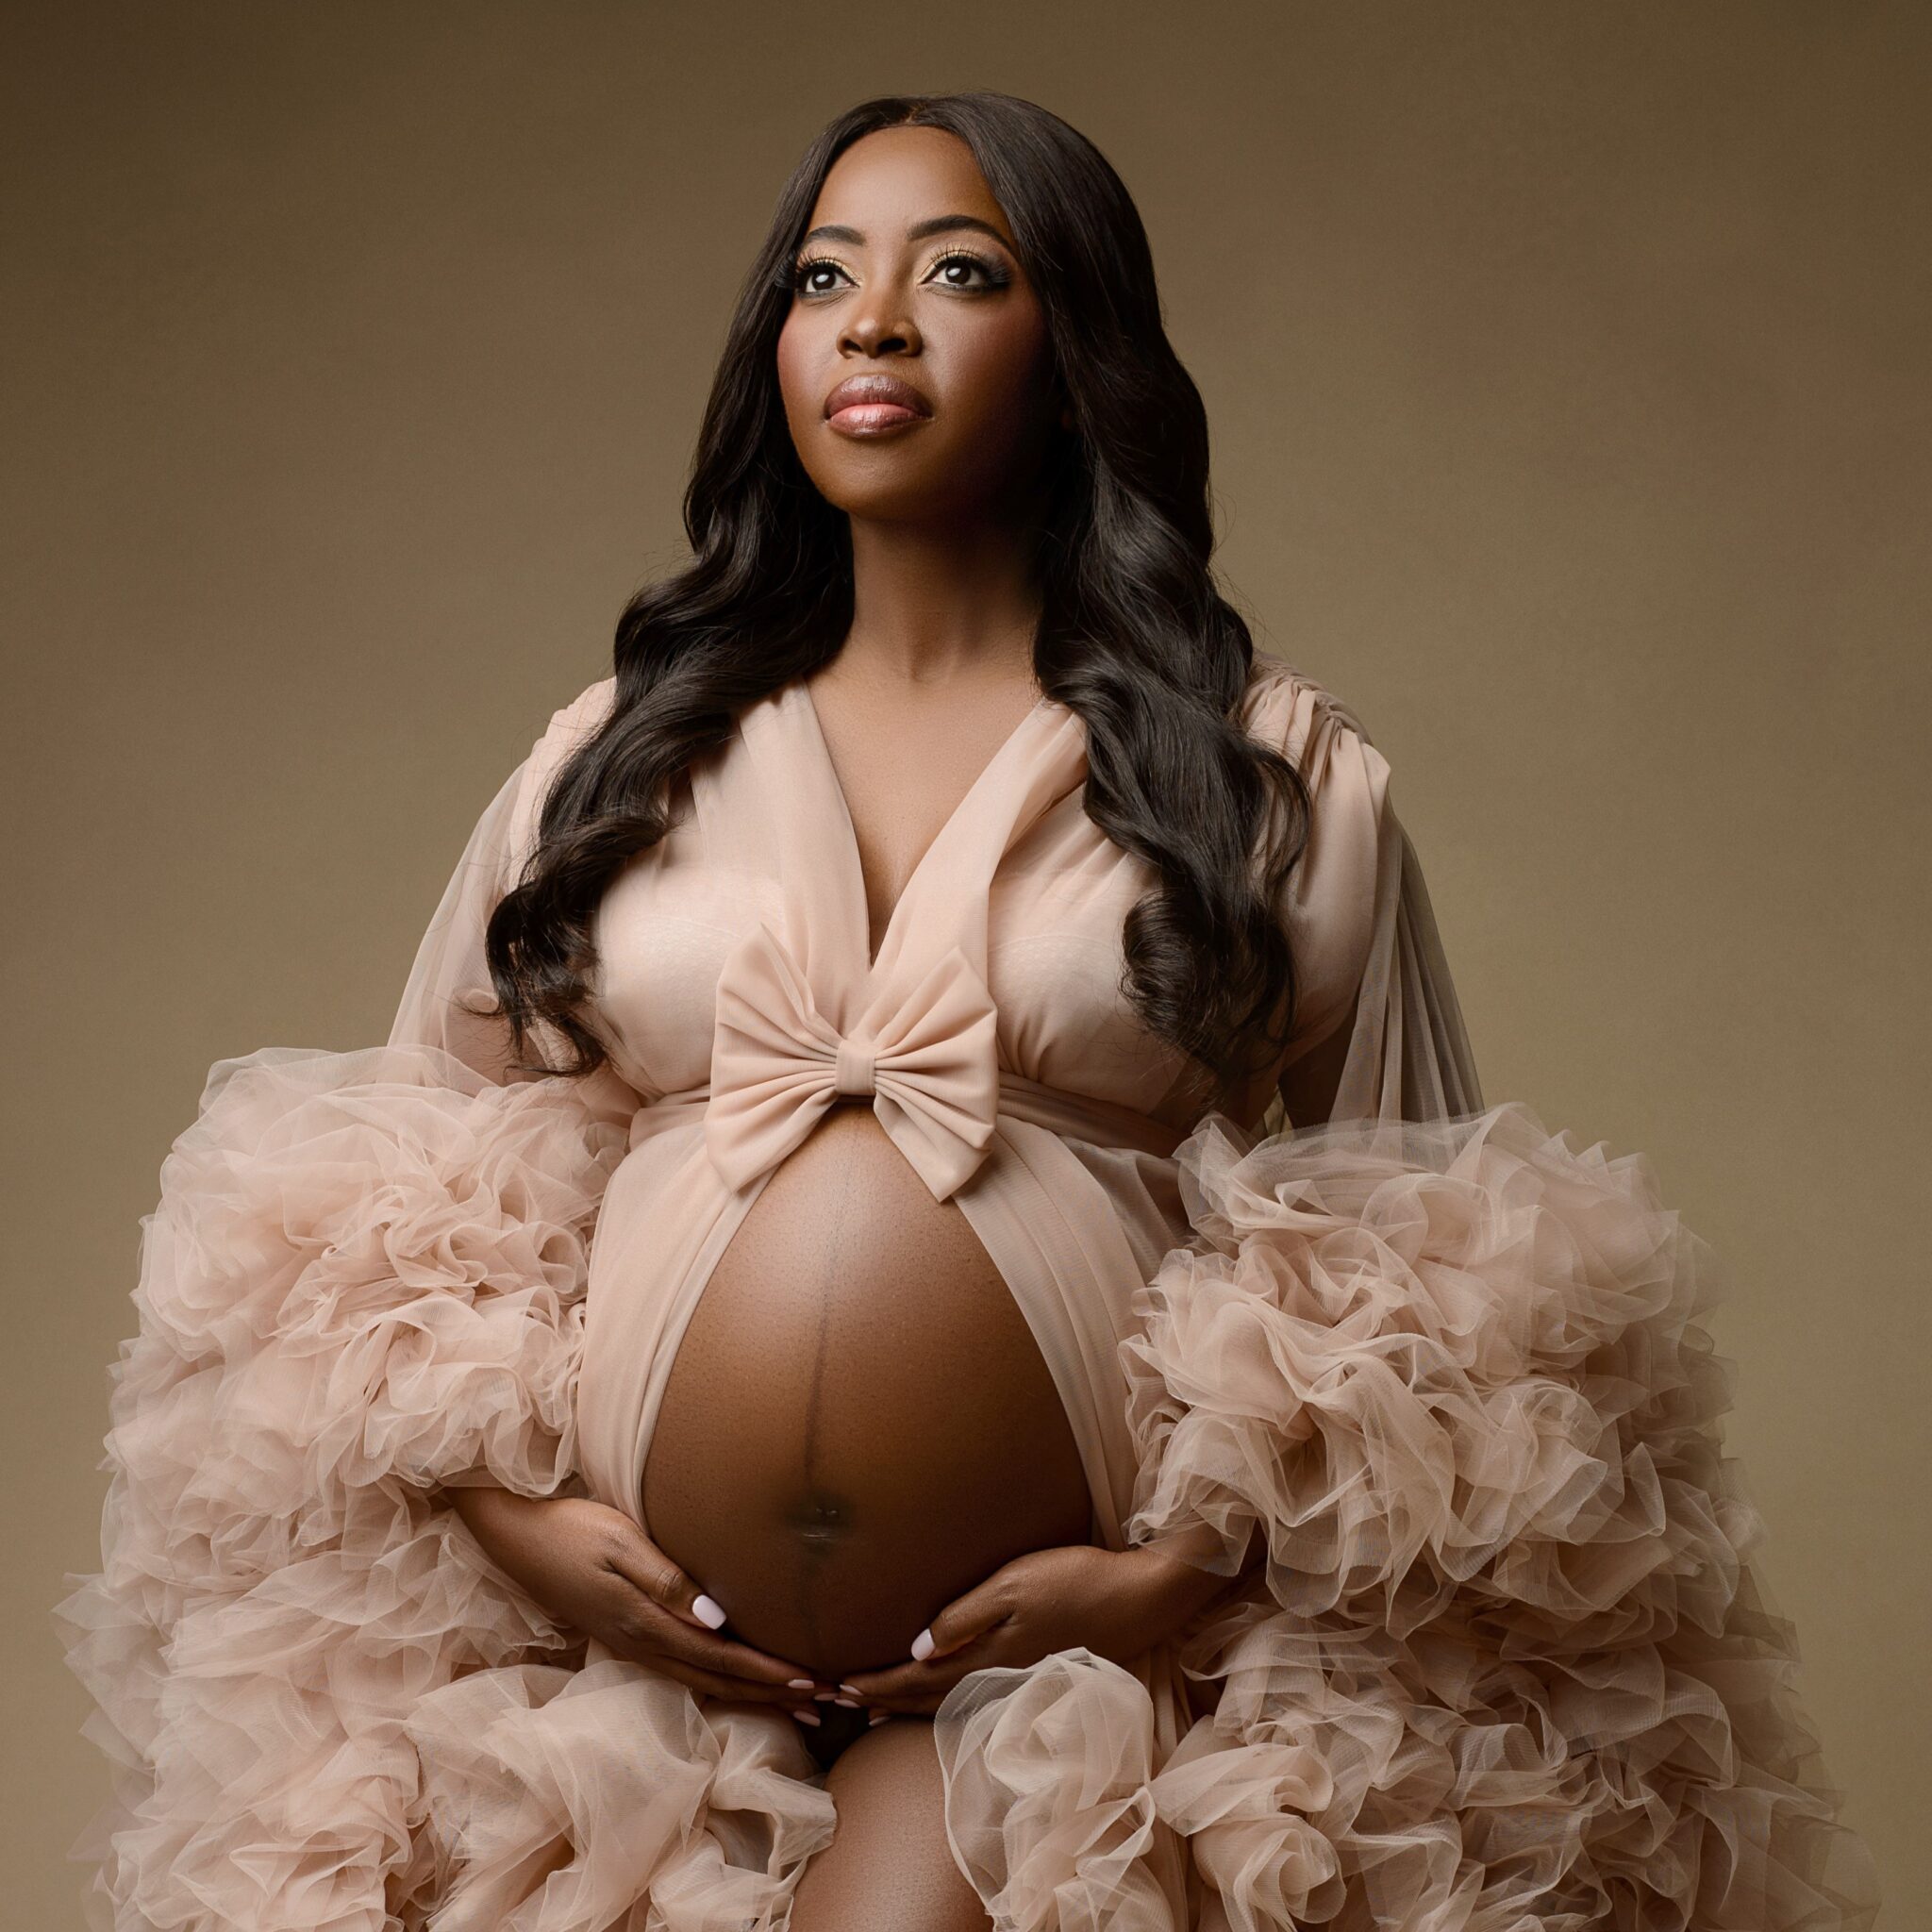 Maternity portrait of black woman holding her baby bump poking thru a luxurious dusty-pink robe made of tulle with ruffles at the sleeves.